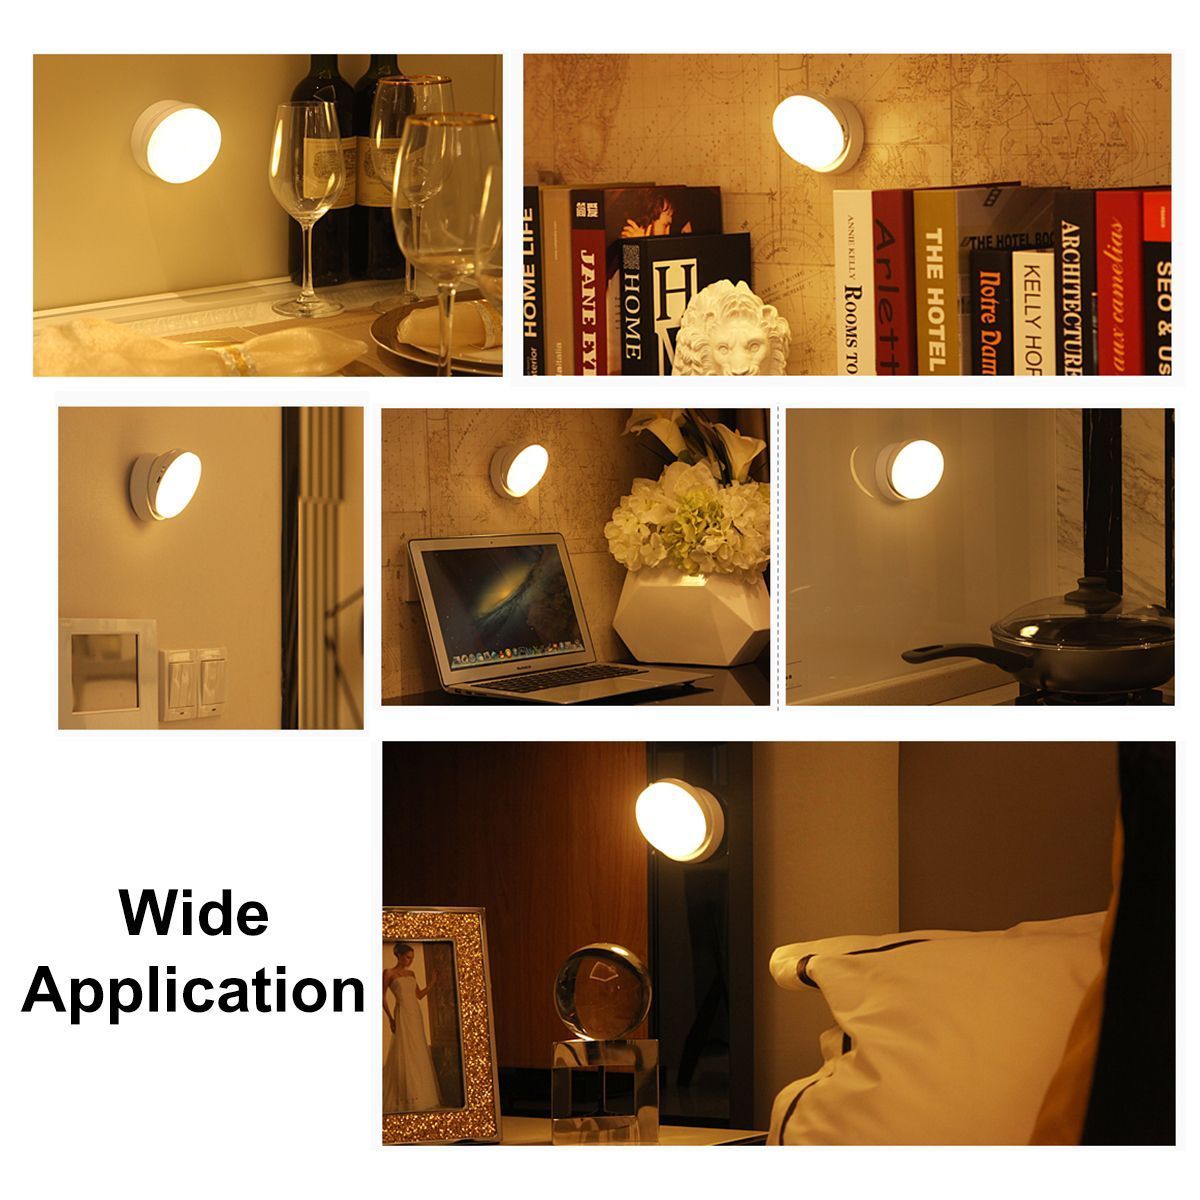 360-Degree-Rotation-LED-Motion-Sensor-Night-Light-USB-Rechargeable-Lamp-with-Magnetic-Base-for-Stair-1675089